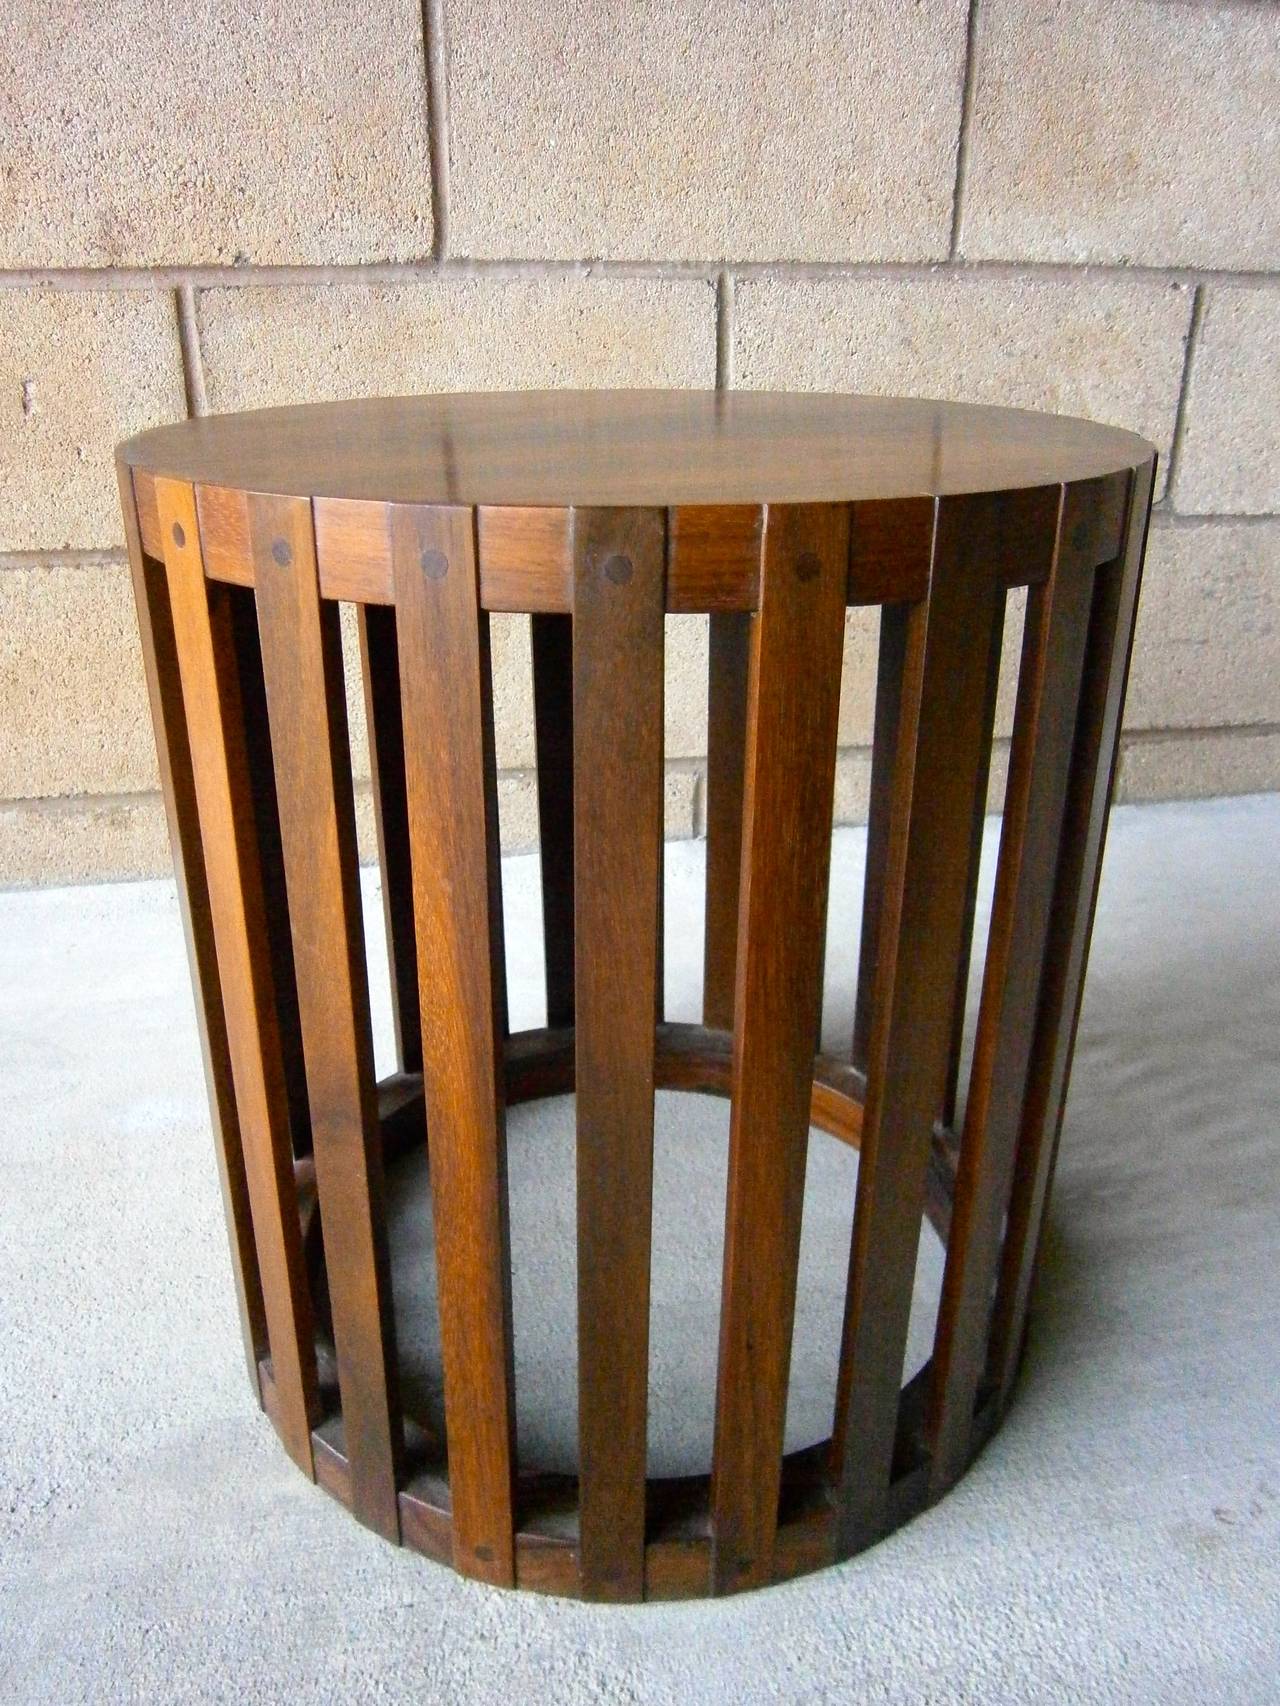 A small circular solid rosewood occasional table from the 1970s.  The slatted sides are attached to the top and to the bottom ring with wooden pegs. This splendid table would be fantastic in any interior.